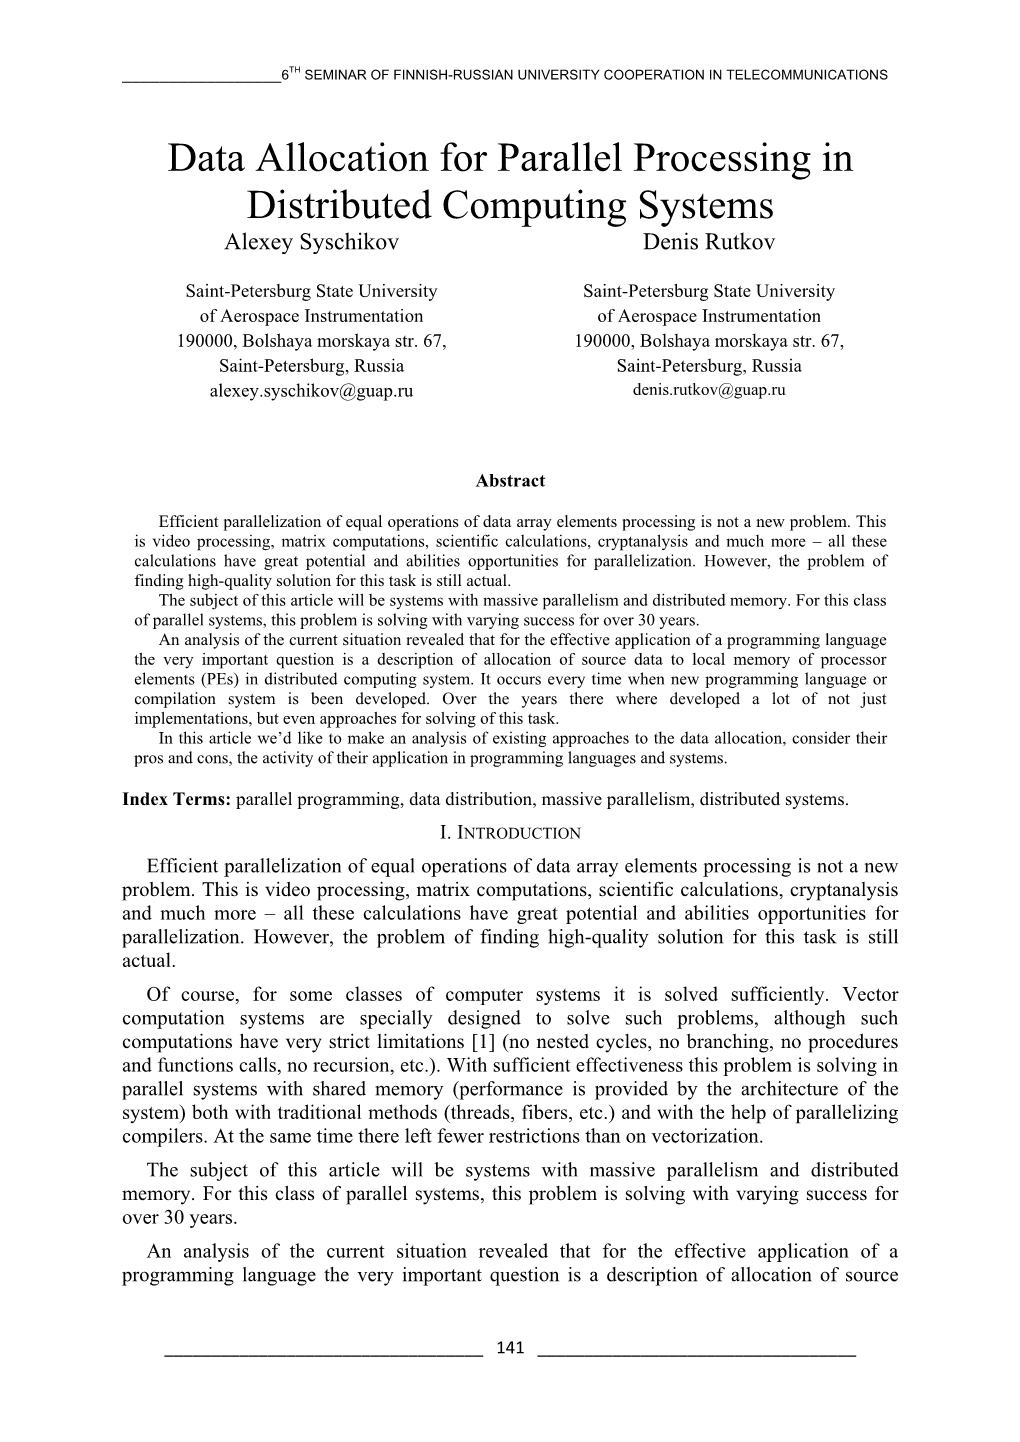 Data Allocation for Parallel Processing in Distributed Computing Systems Alexey Syschikov Denis Rutkov